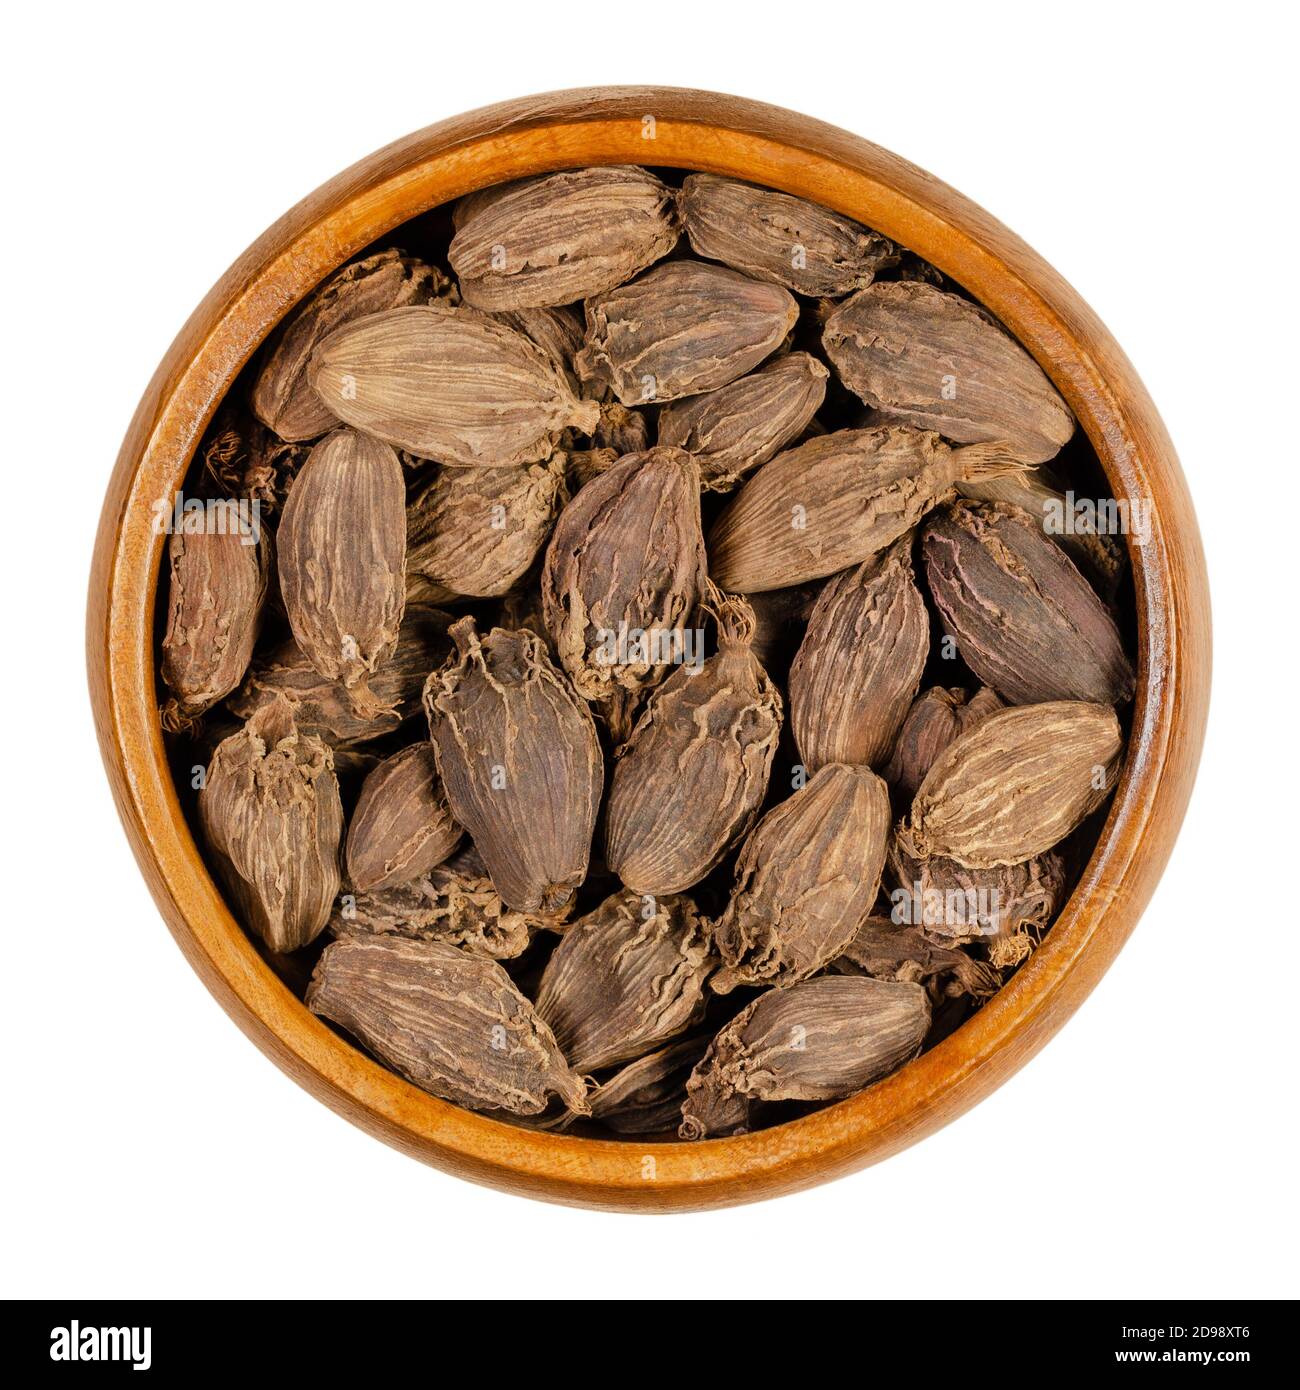 Black cardamom pods in a wooden bowl. Processed, dry fruits and seeds of Amomum subulatum, a spice with strong camphor-like flavour. Stock Photo